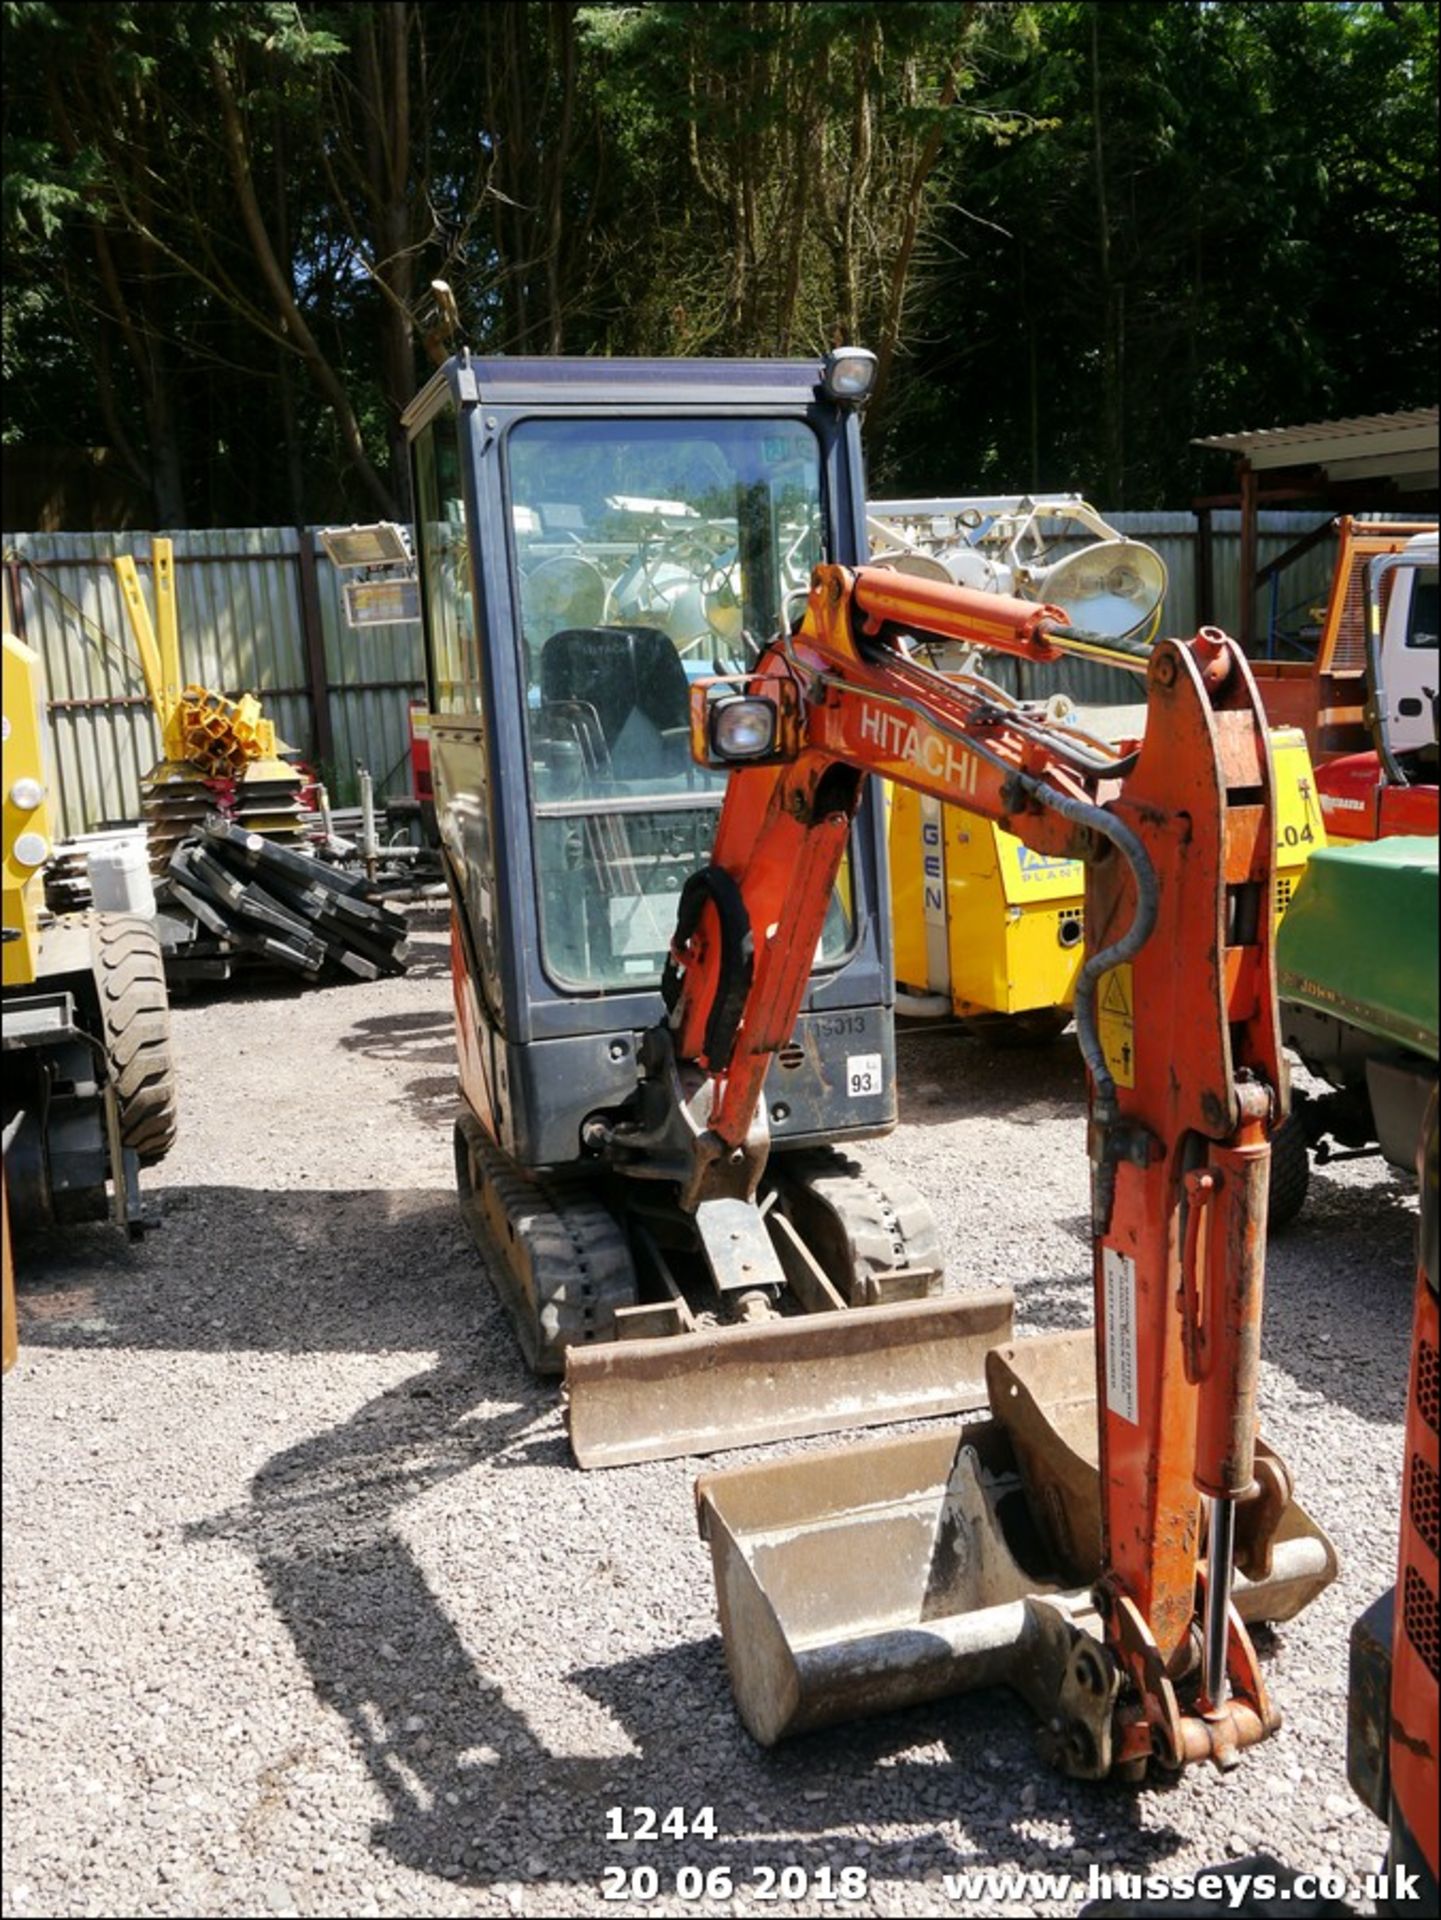 HITACHI ZAXIS 17U DIGGER 2013, 1096 RECORDED HOURS, C/W 2 BUCKETS, PIPED 719013 - Image 2 of 7